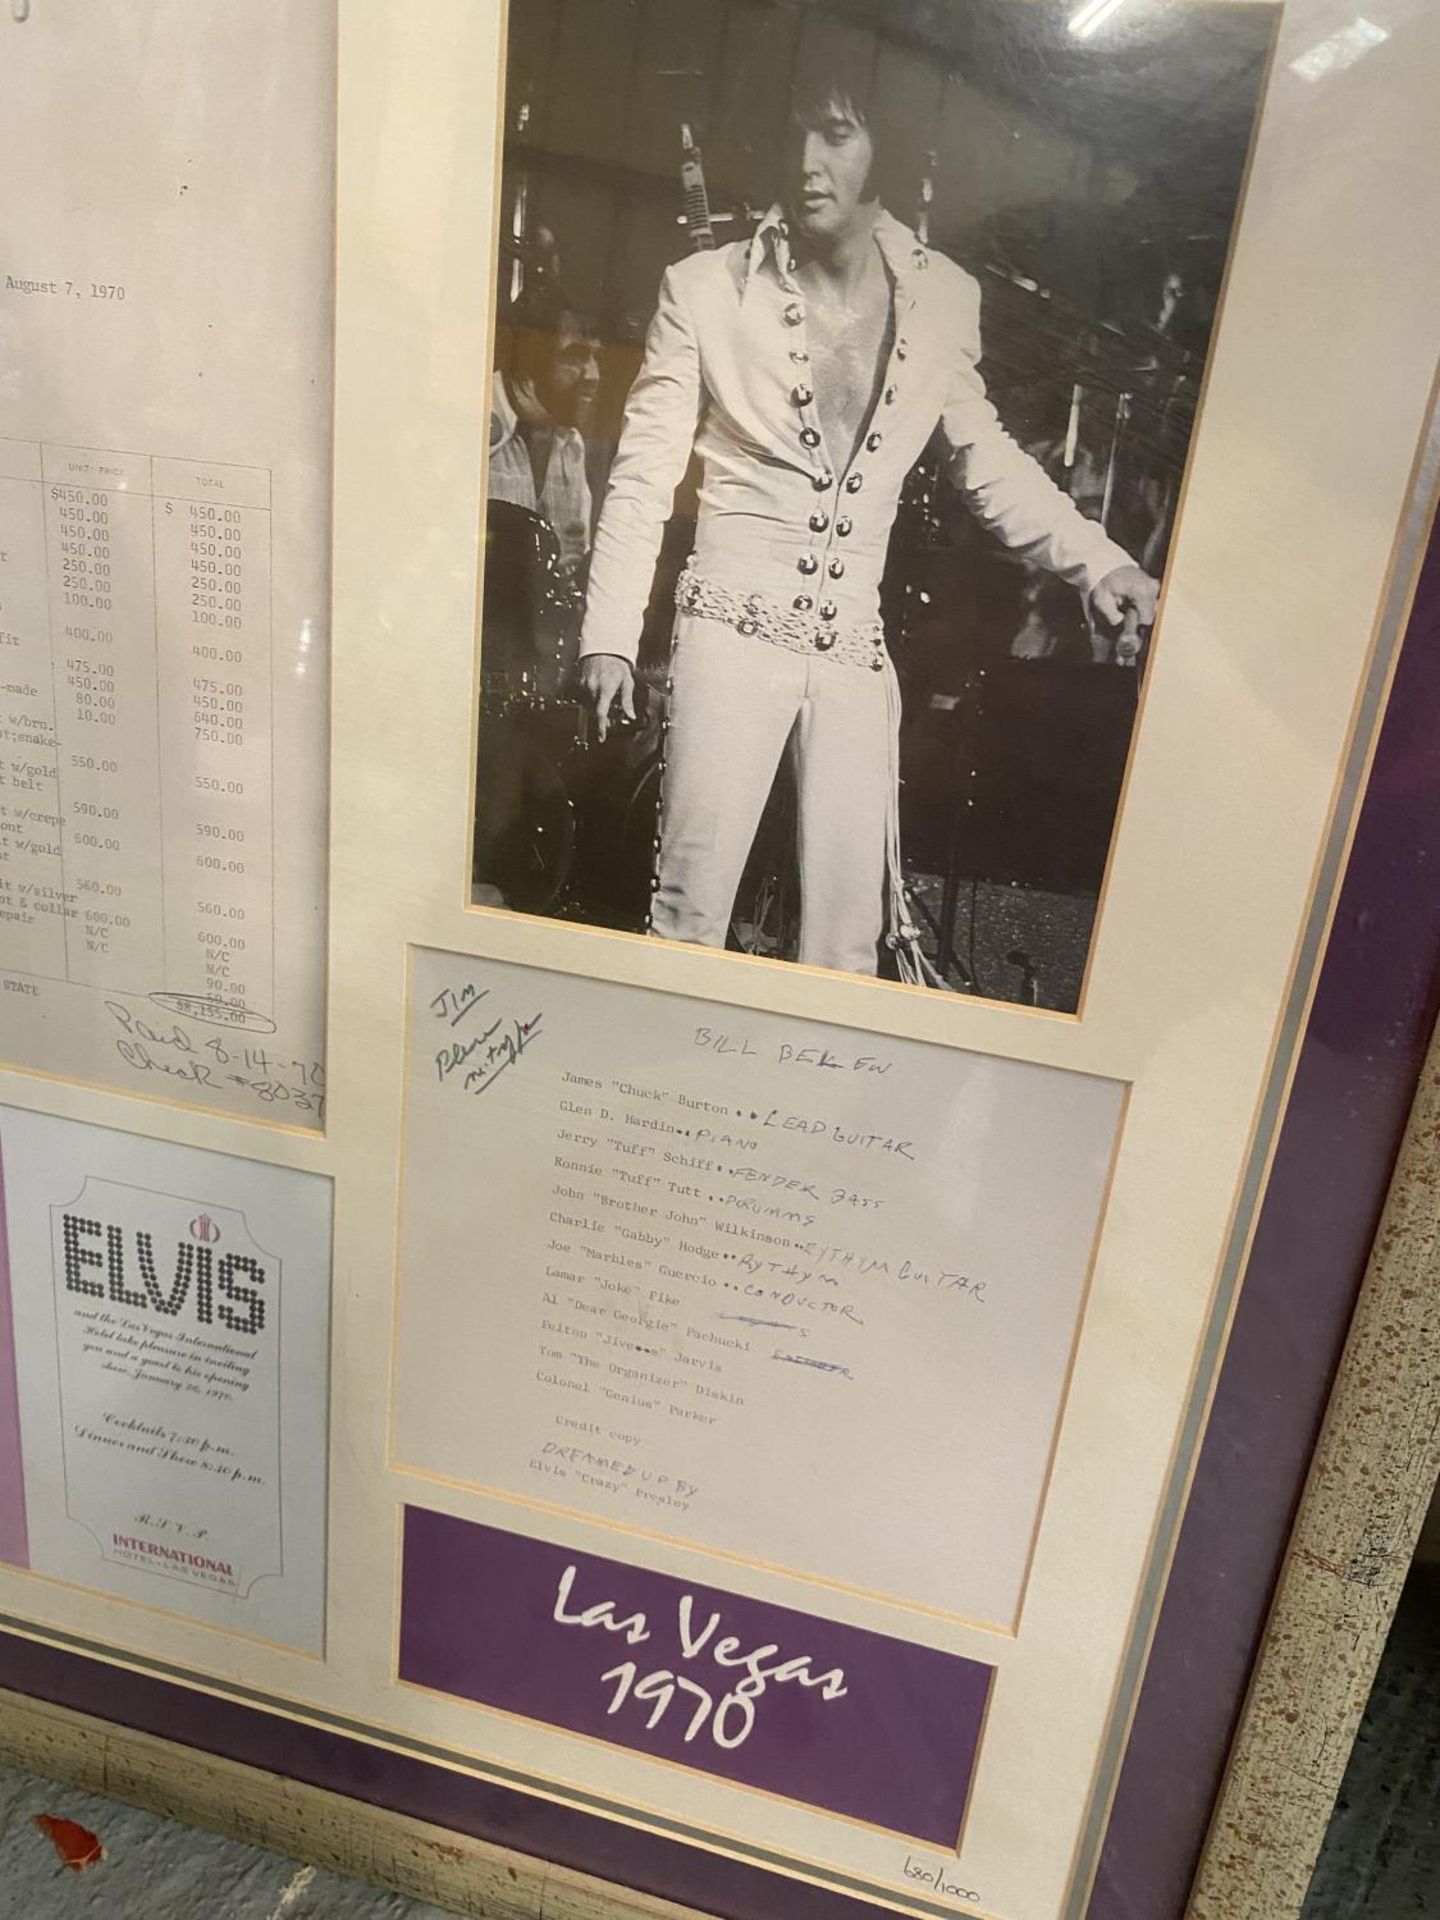 A FRAMED LIMITED EDITION 1970 ELVIS MEMORABELIA PICTURE WHICH INCLUDES AUTHENTICITY CERTIFICATE - Image 3 of 4